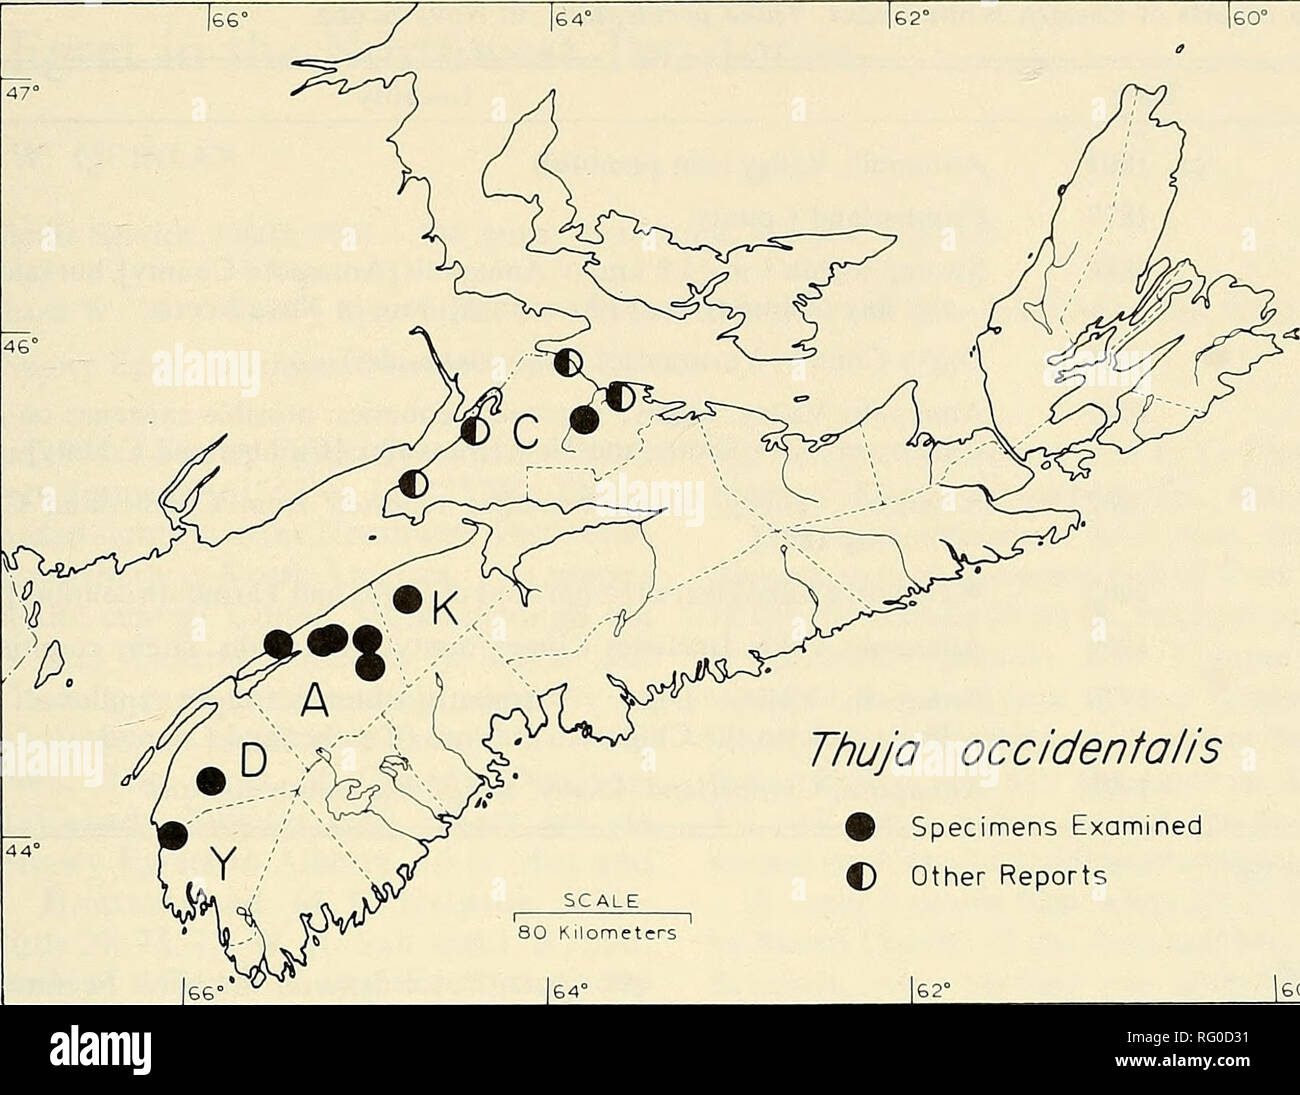 . The Canadian field-naturalist. 1979 Notes 327. Thuja occidenfolis 0 Specimens Examined C Other Reports 30 Kilometers Figure 1. The distribution of Eastern White Cedar, Thuja occidentalis, in Nova Scotia, based on specimens examined at ACAD, DAL, DAO, and NSPM, and on reports obtained through correspondence. A -— Annapohs County, C — Cumberland County, D — Digby County, K  Kings County, Y —- Yarmouth County. highway and the railroad. Cedar, which used to be very common in Cumberland Co., is now rare and there are only a few cedar stands remaining. Department of Lands and Forests, Oxford. S.  Stock Photo